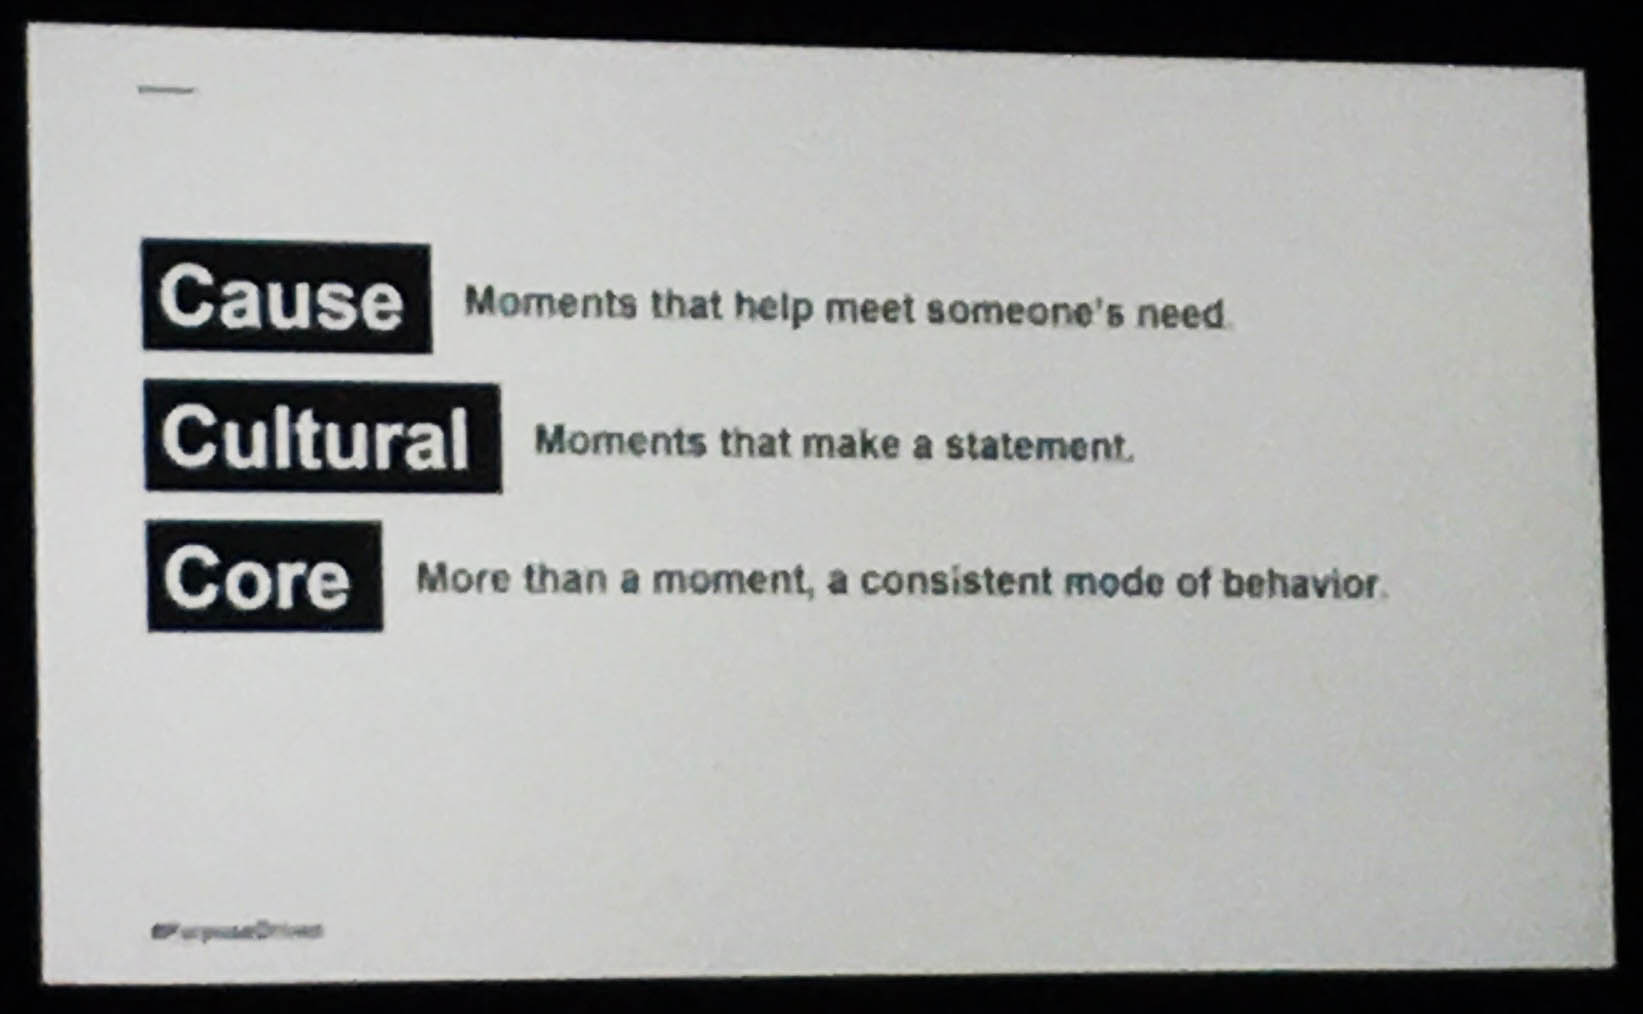 Cause: moments that help meet someone's need. Cultural: moments that make a statement. Core: more than a moment, a consistent mode of behavior.